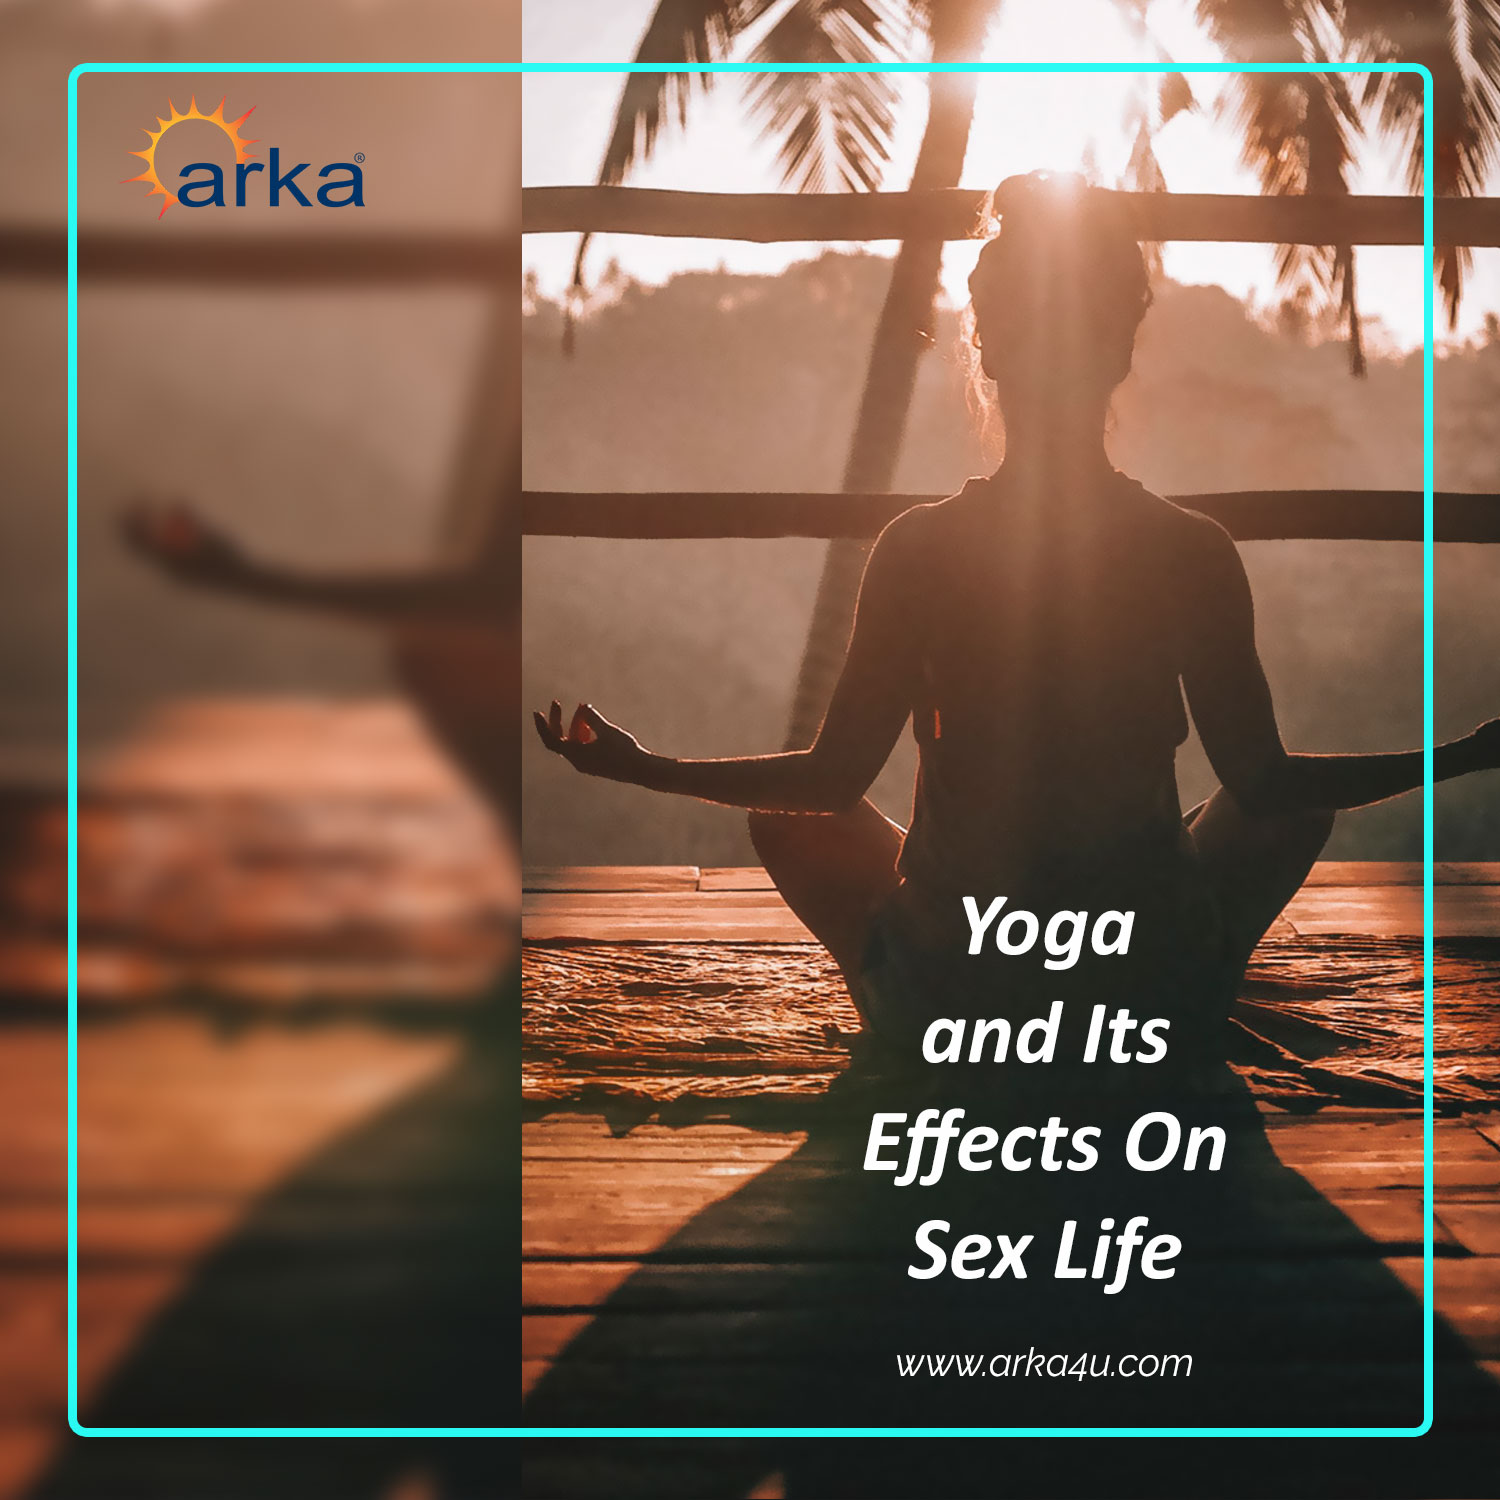 Yoga and its effects on sex life